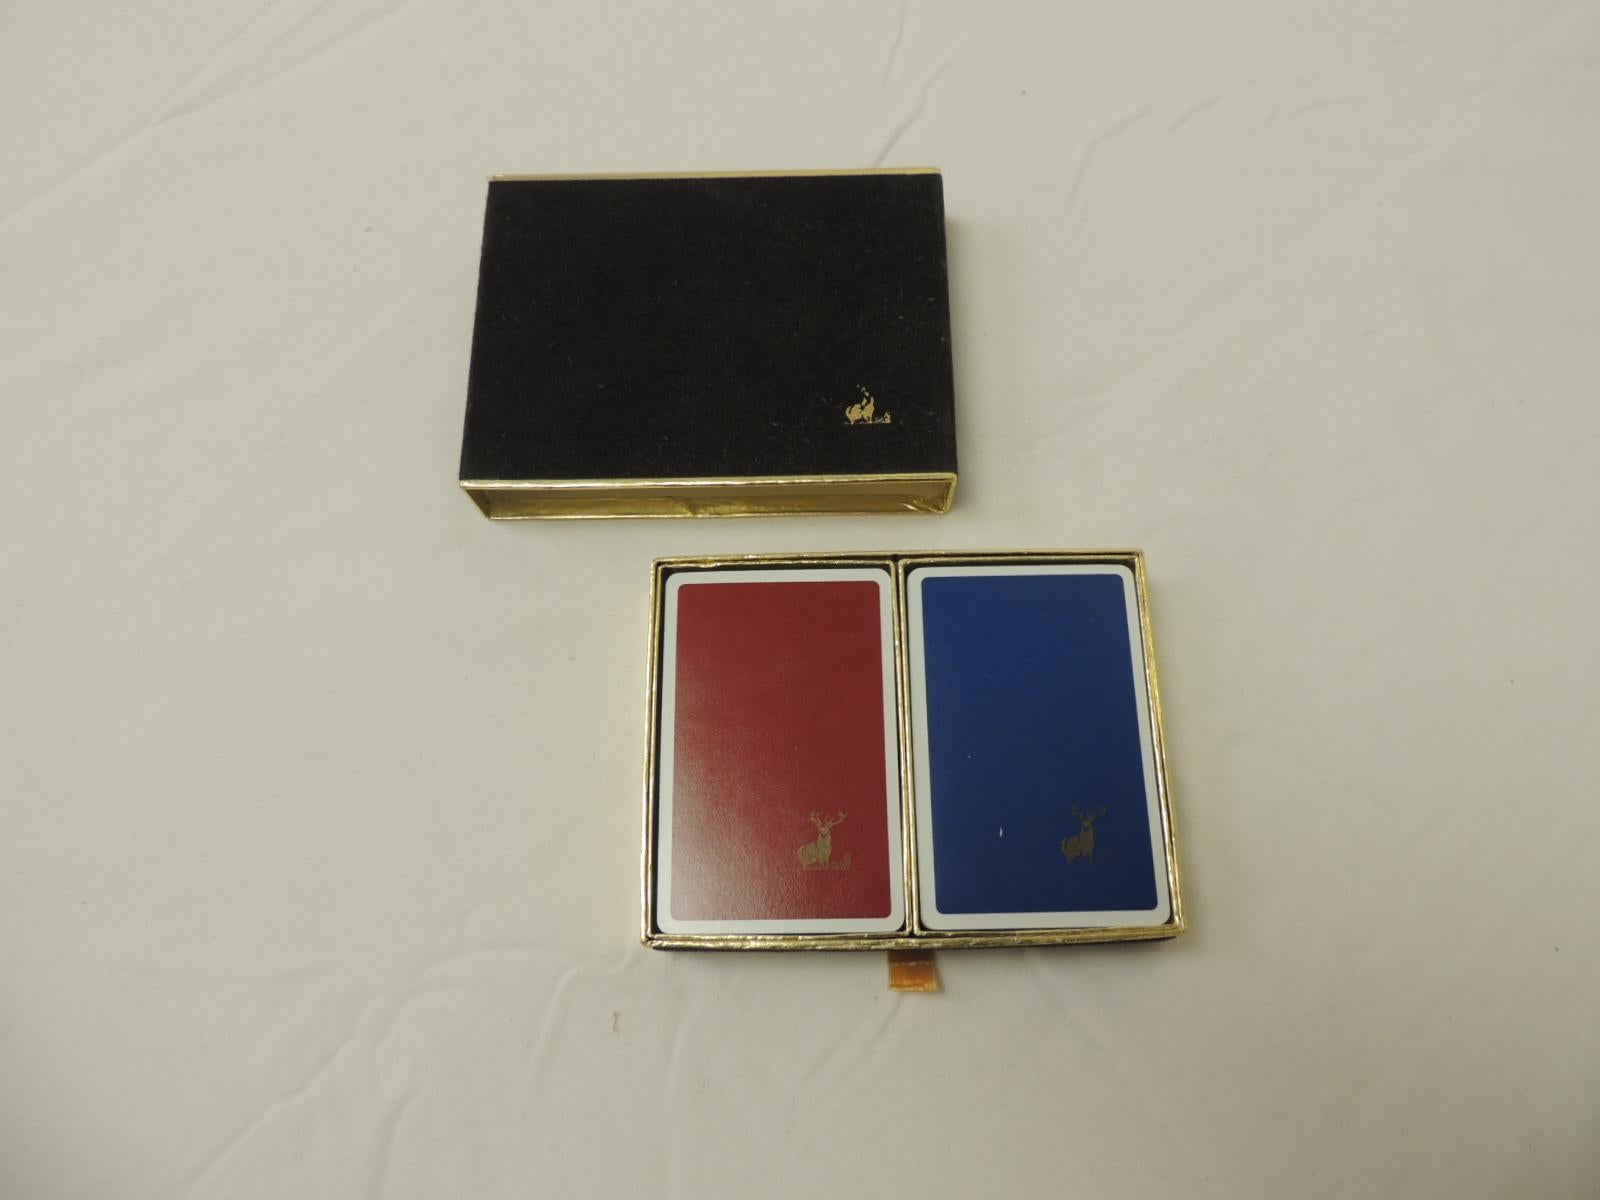 Vintage velvet covered playing card box.
Black box with gold edges, blue and red color playing cards.
Size: 4 x 5 x 1.